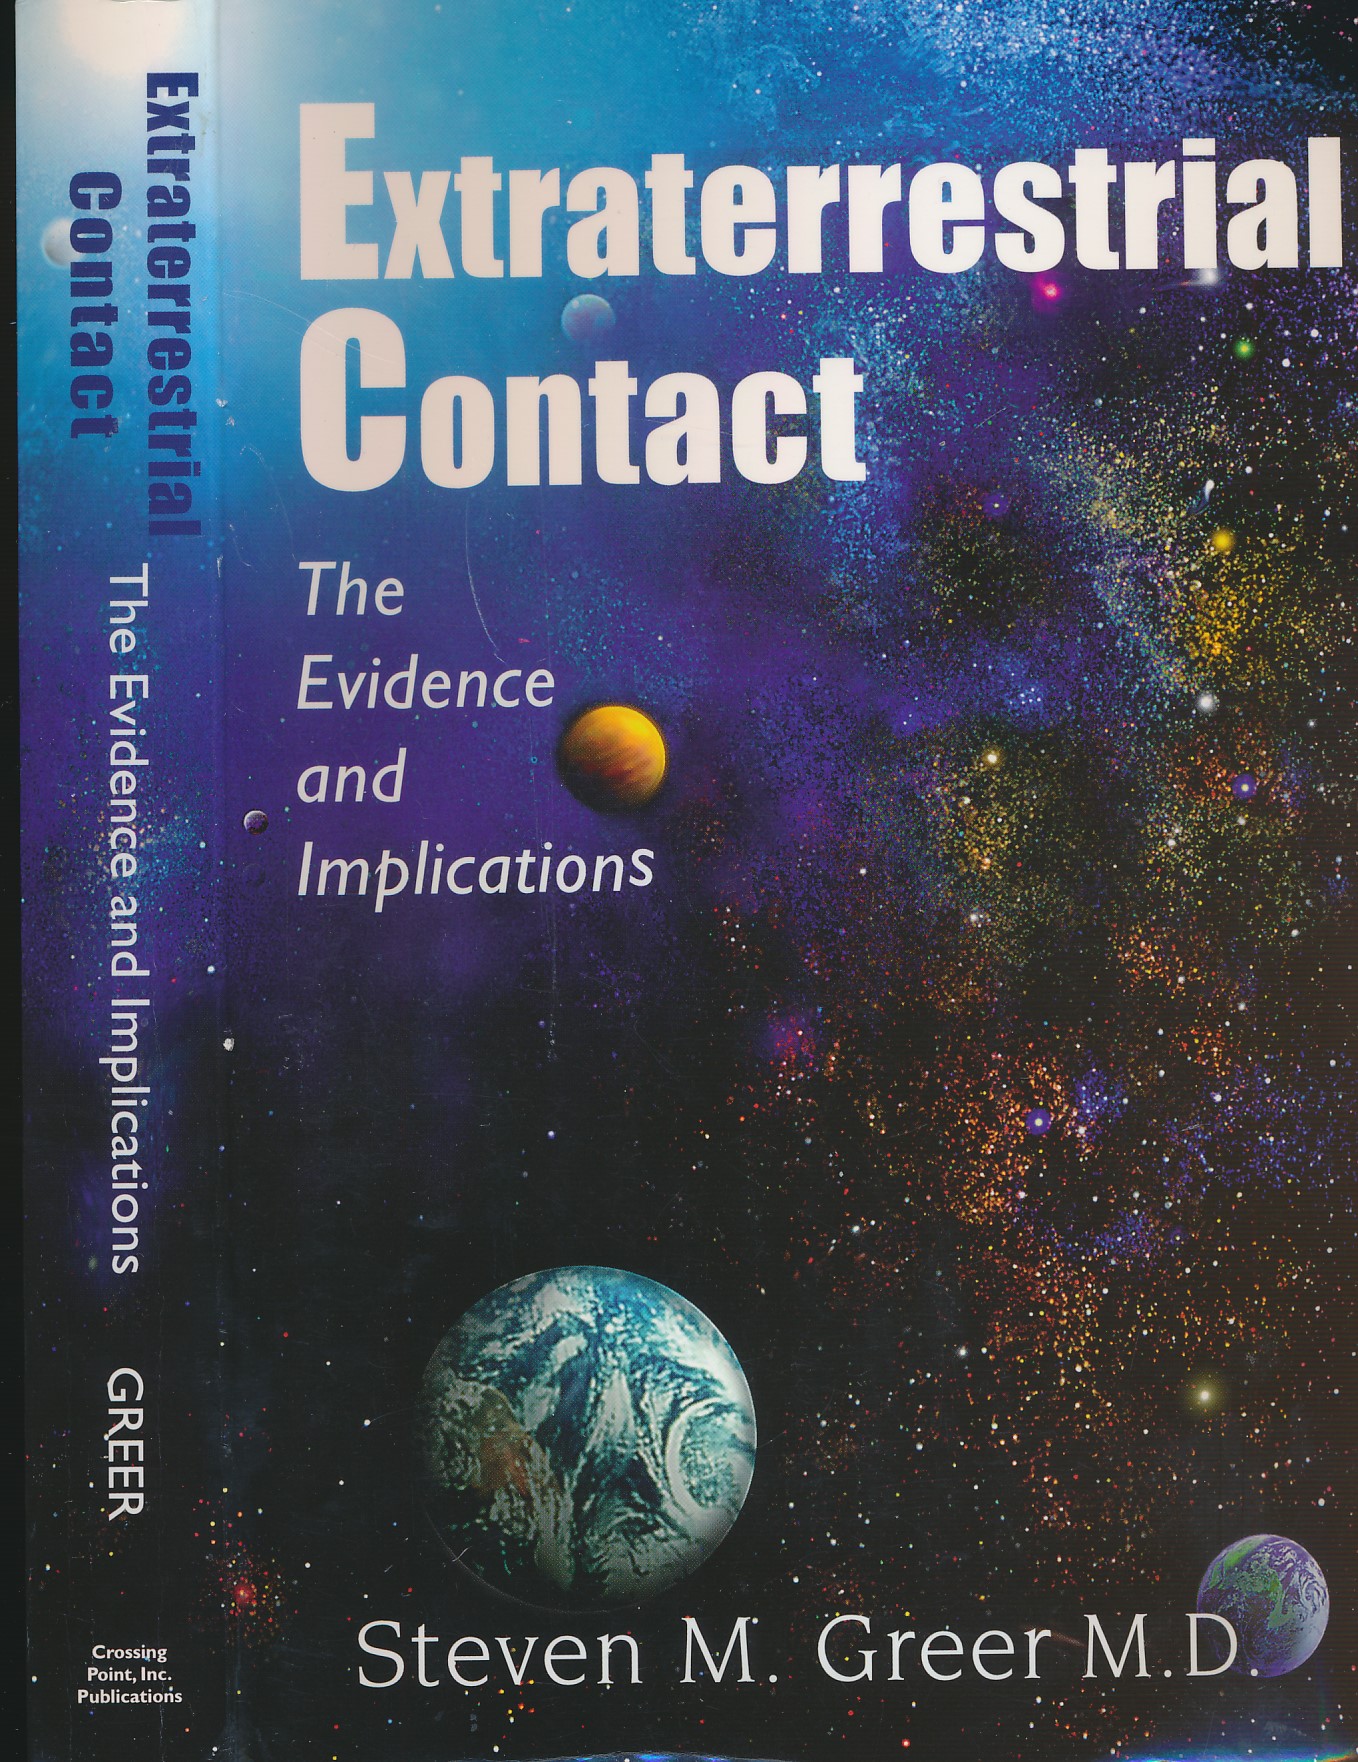 Extraterrestrial Contact. The Evidence and Implications